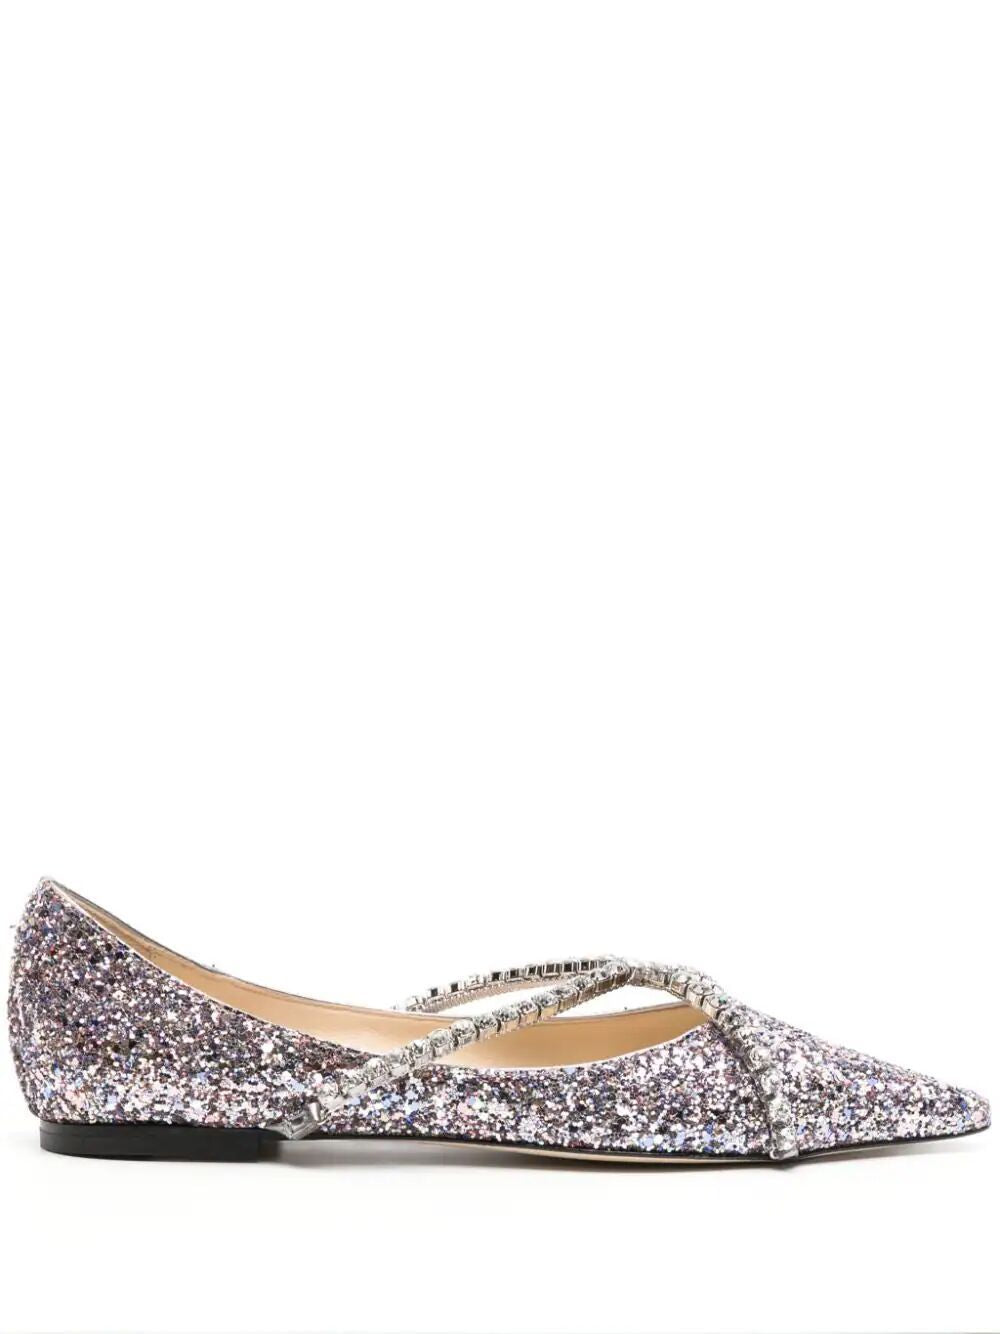 High-Quality Metallic Ballerinas for Women - Add Some Sparkle to Your Shoe Collection!